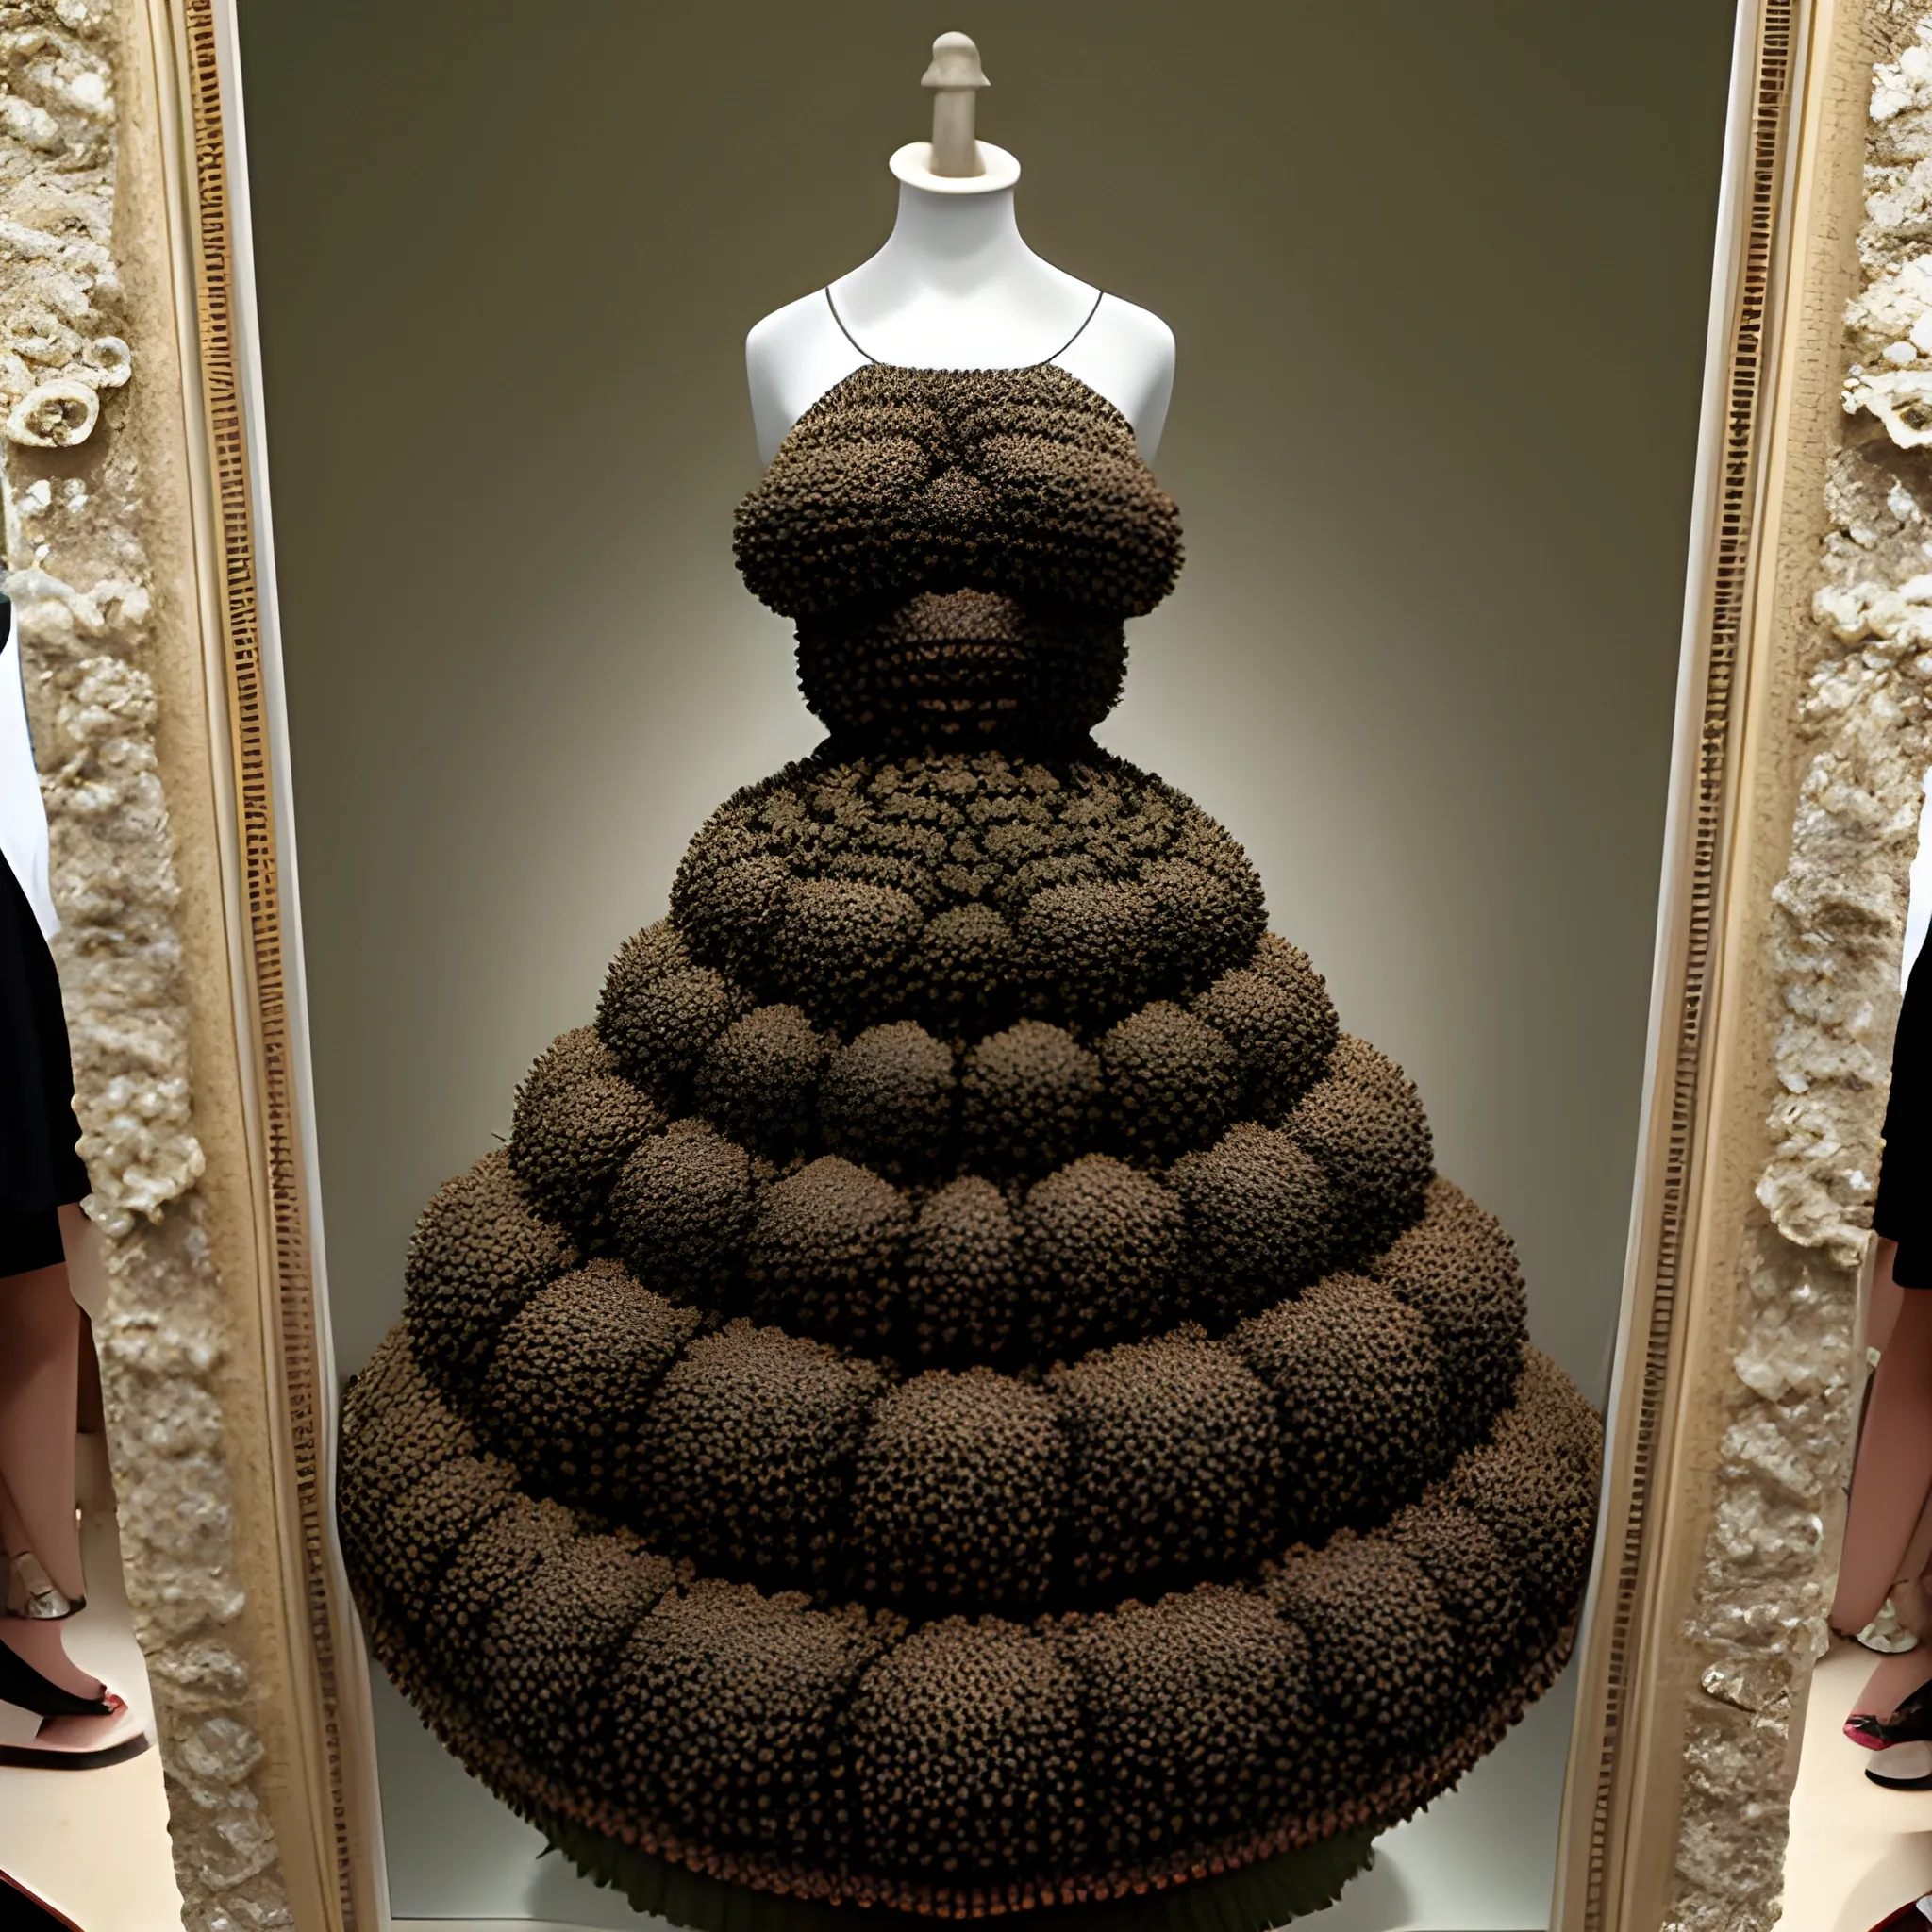 a dress made of ants